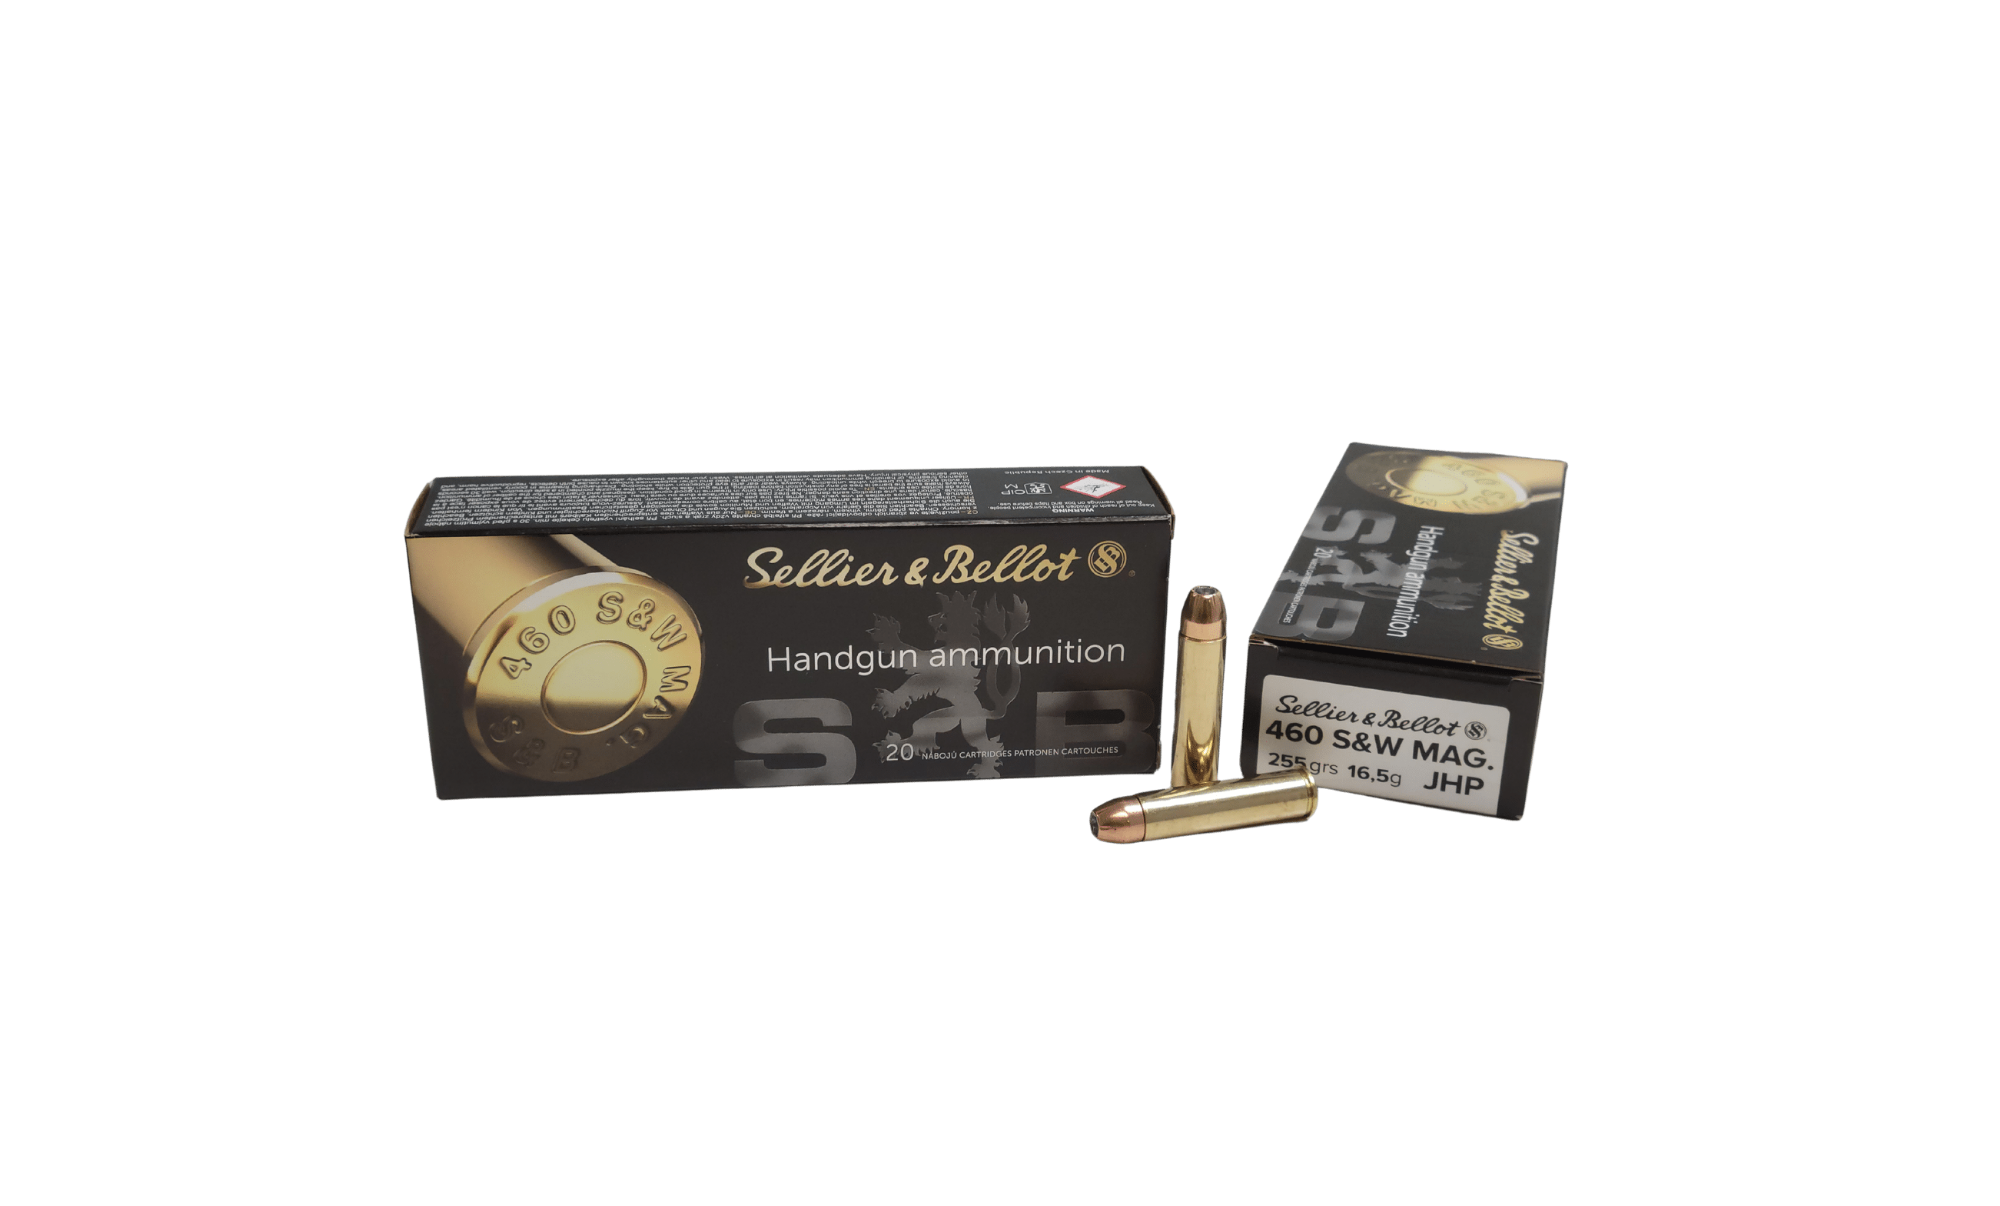 Precision One .357 Mag 158 Grain Full Metal Jacket – 50 Rounds (Box) [NO TX outside Texas] Product Image